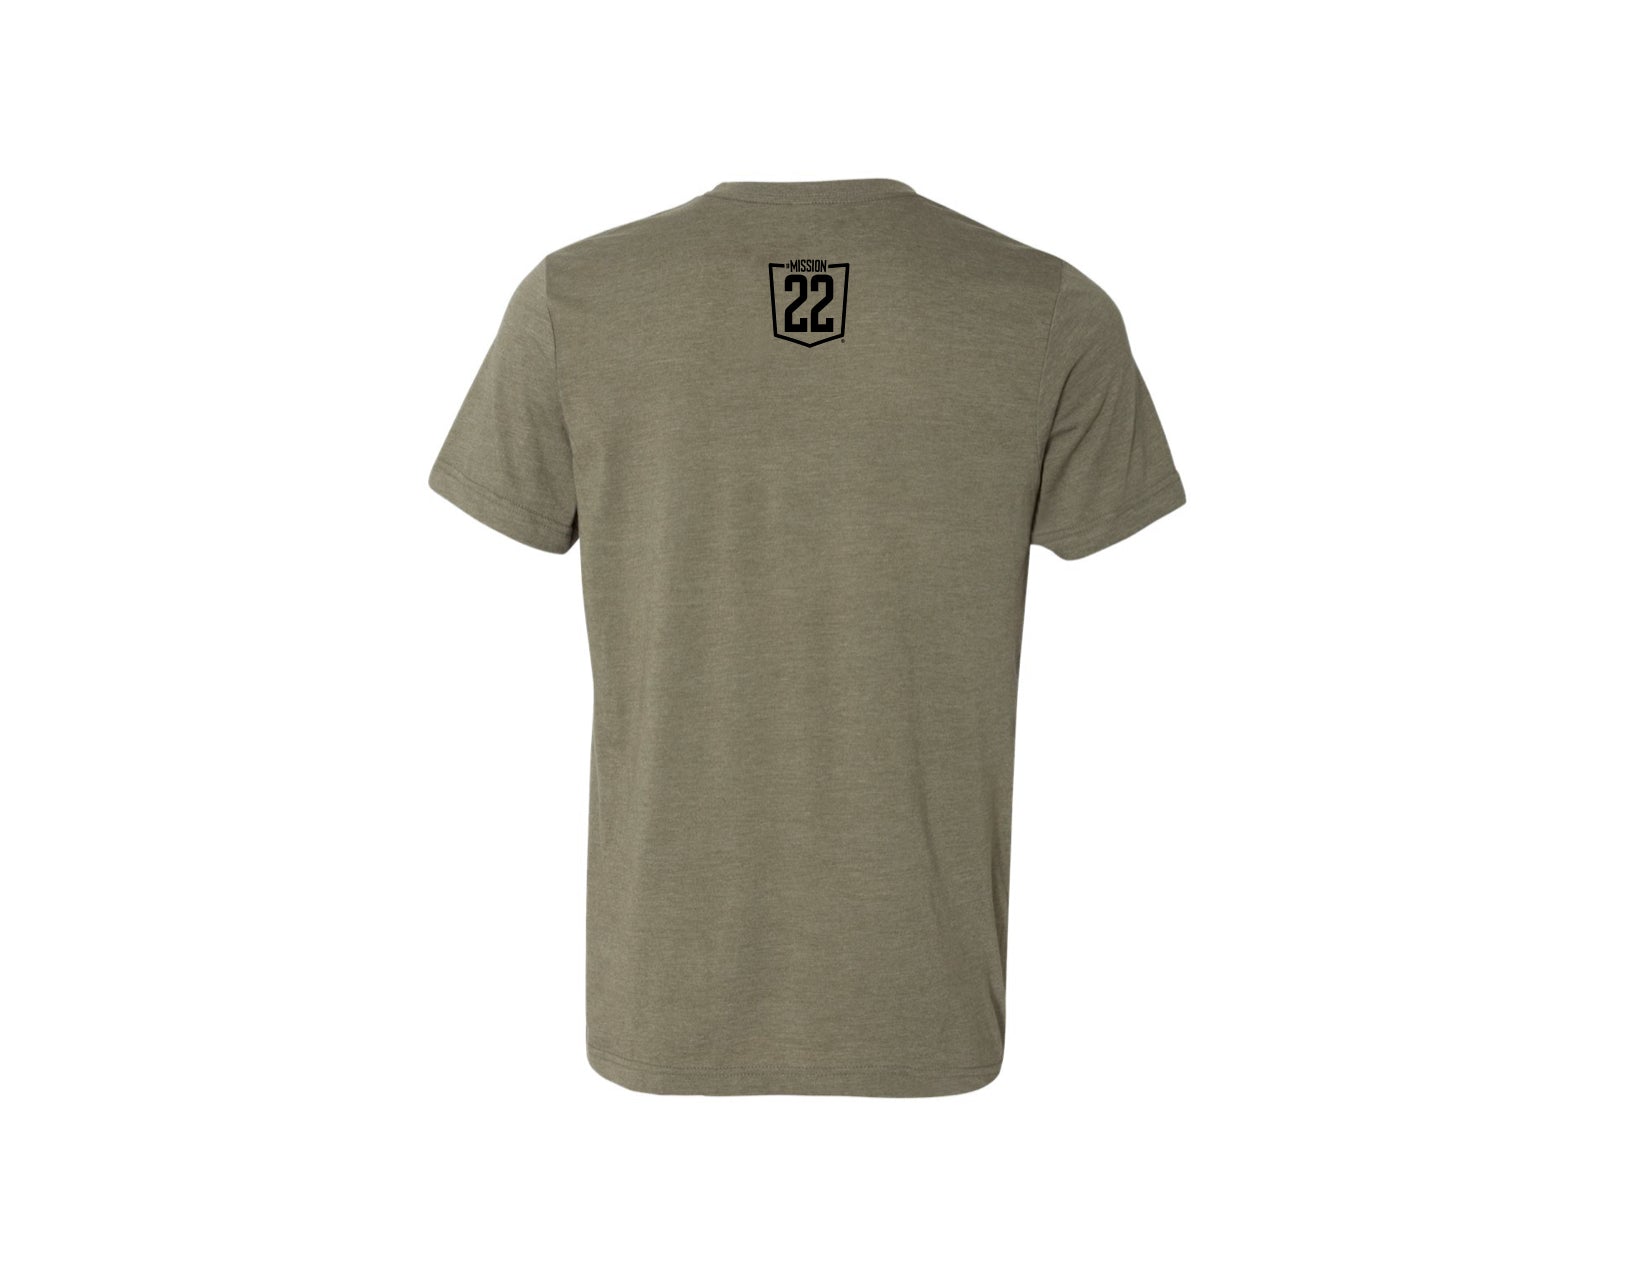 Product Image of Mission 22 Olive / Military Green Tee #2